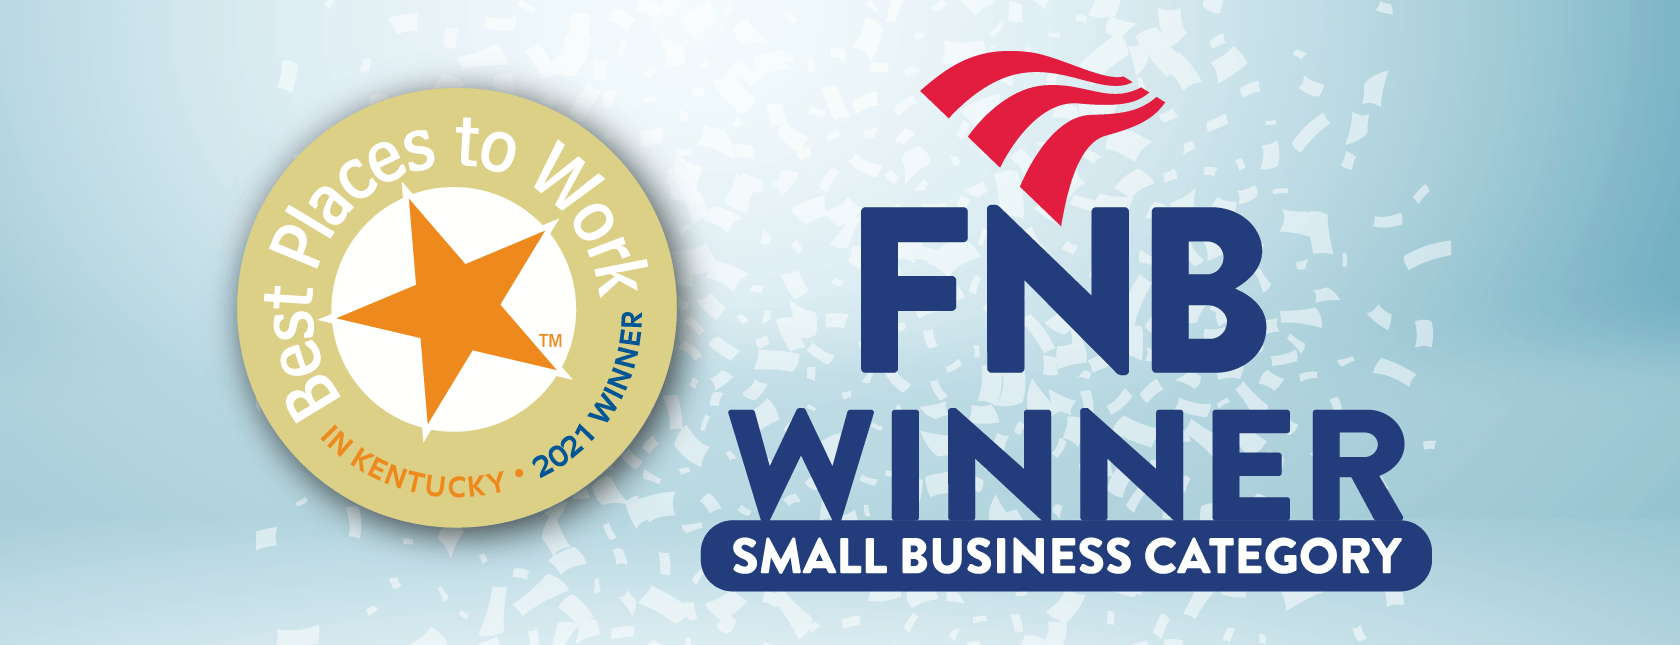 FNB Bank Named Best Places to Work in Kentucky Winner